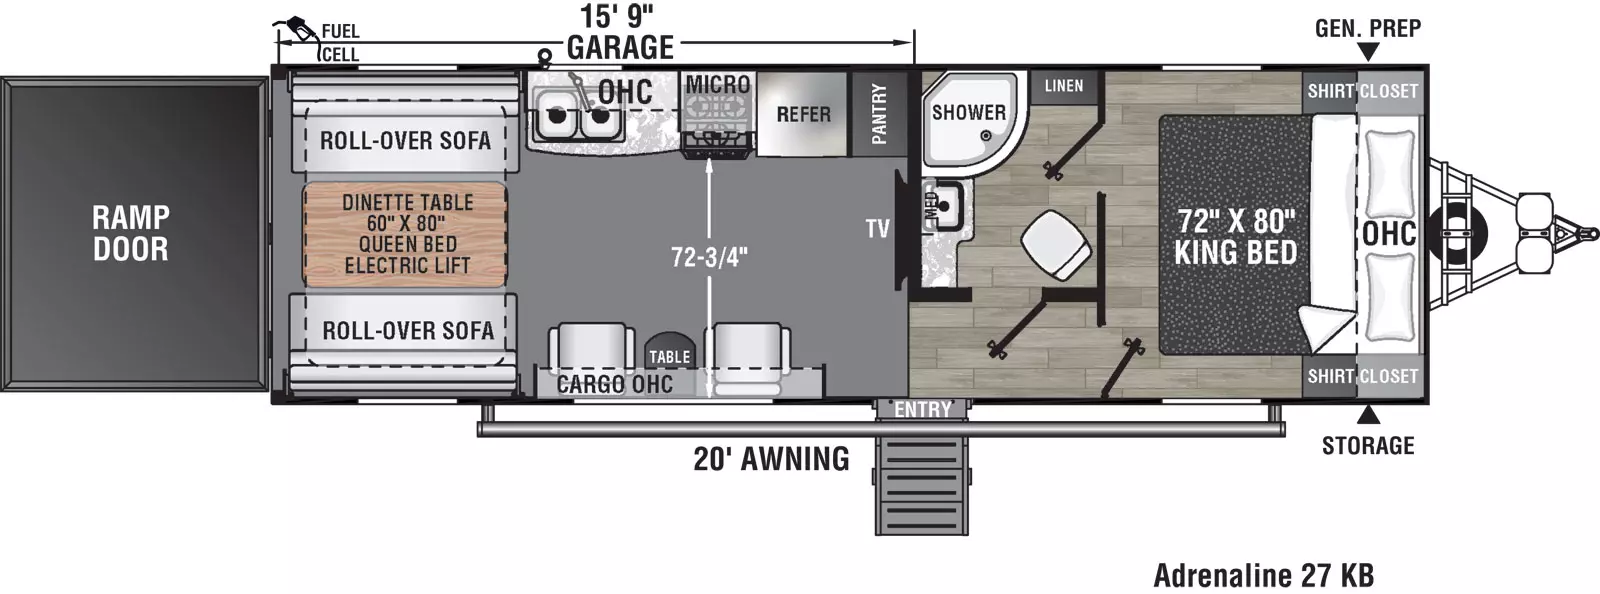 The 27KB has no slide outs and one entry door on the door side. Interior layout from front to back: front bedroom with side-facing king bed and overhead cabinet; walk through bathroom on off door side; kitchen living dining area; off door side kitchen containing pantry, refrigerator, cook top stove, overhead microwave, double basin sink, and overhead cabinet; two euro chairs on the door side with table and overhead cabinet; one roll-over sofa on door side and one roll-over sofa on the off-door side of the unit; dinette table; and rear ramp door.